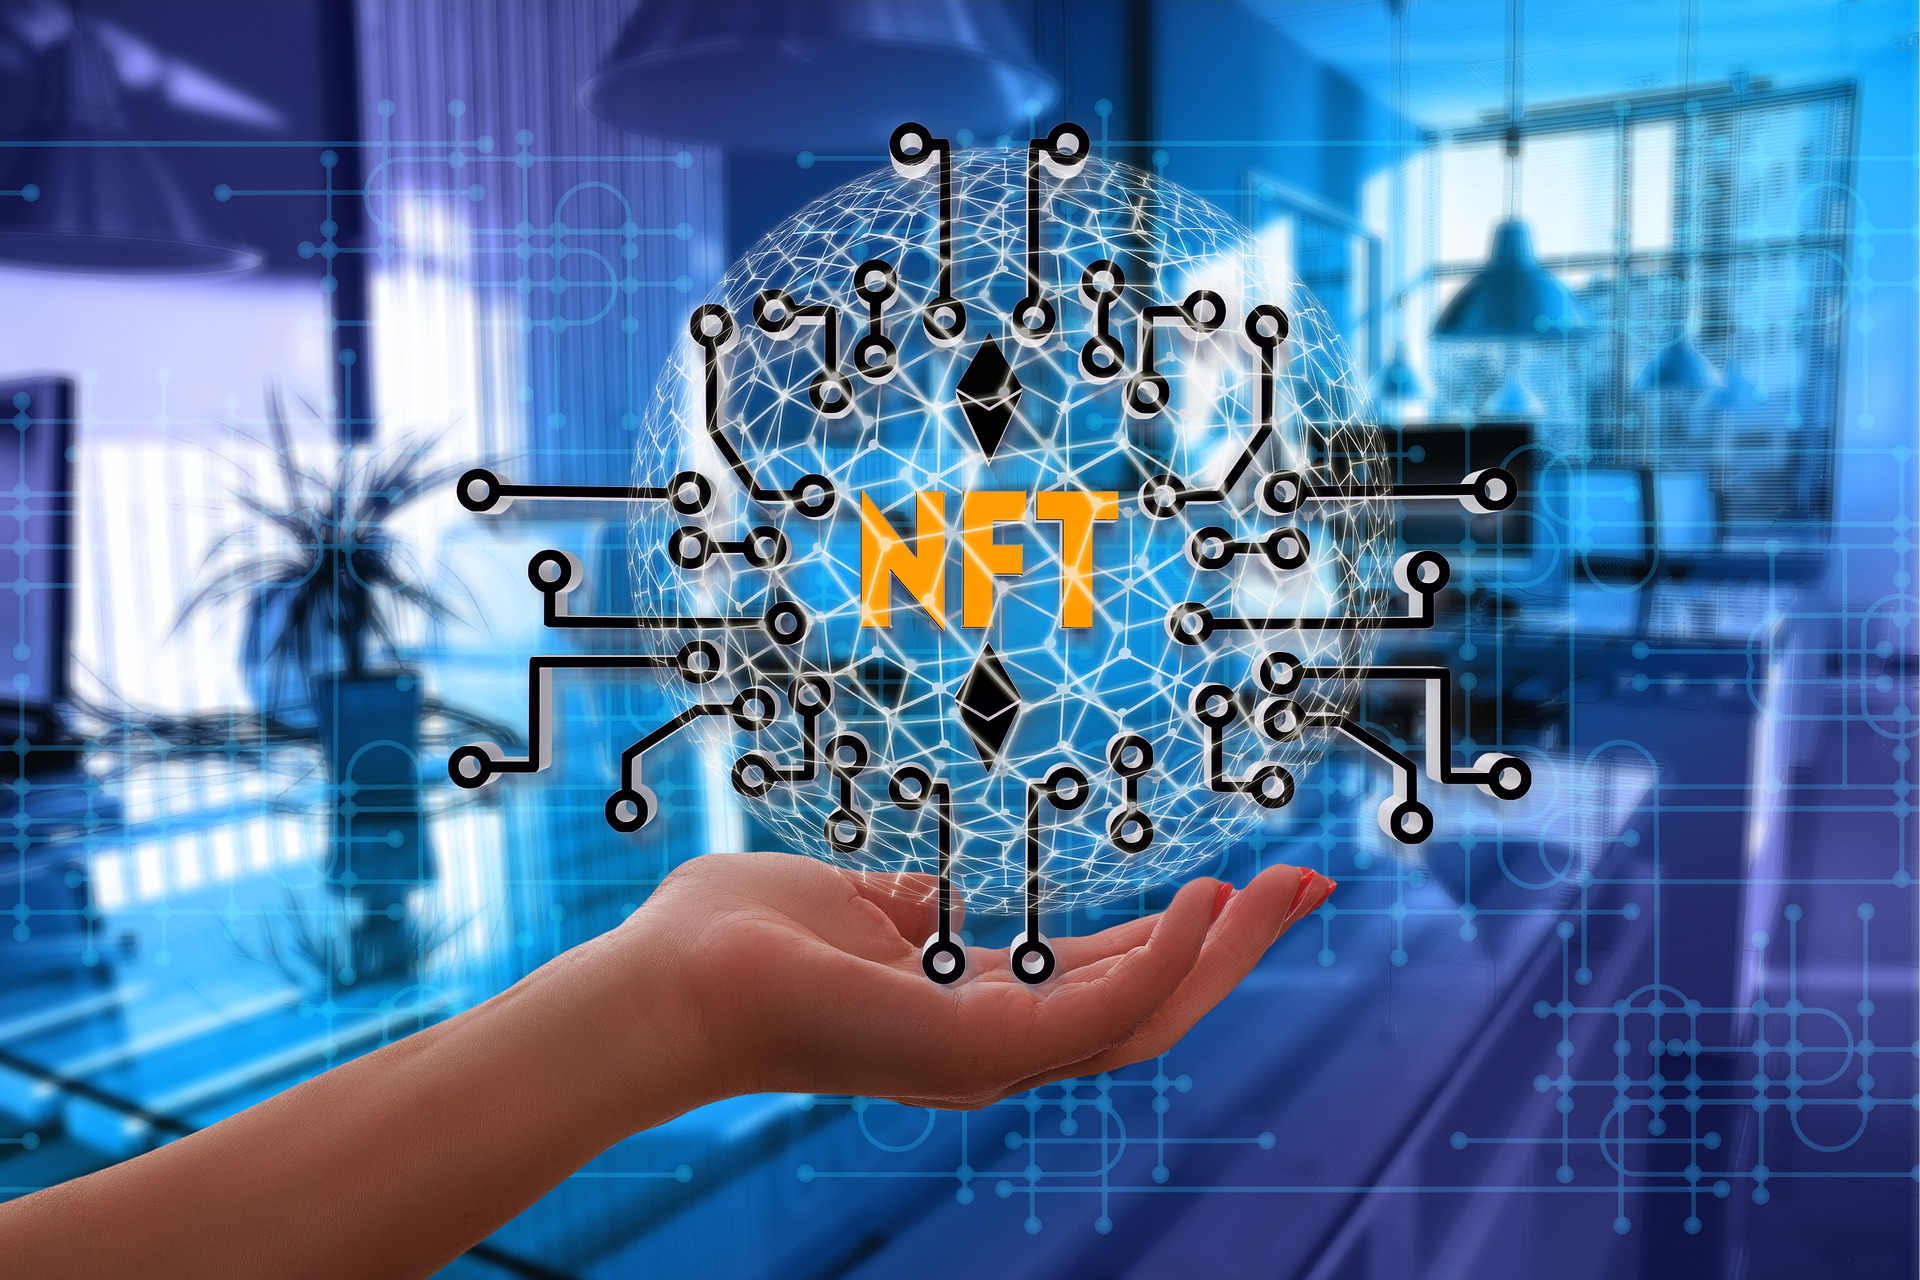 blockchain technology, nfts, and more